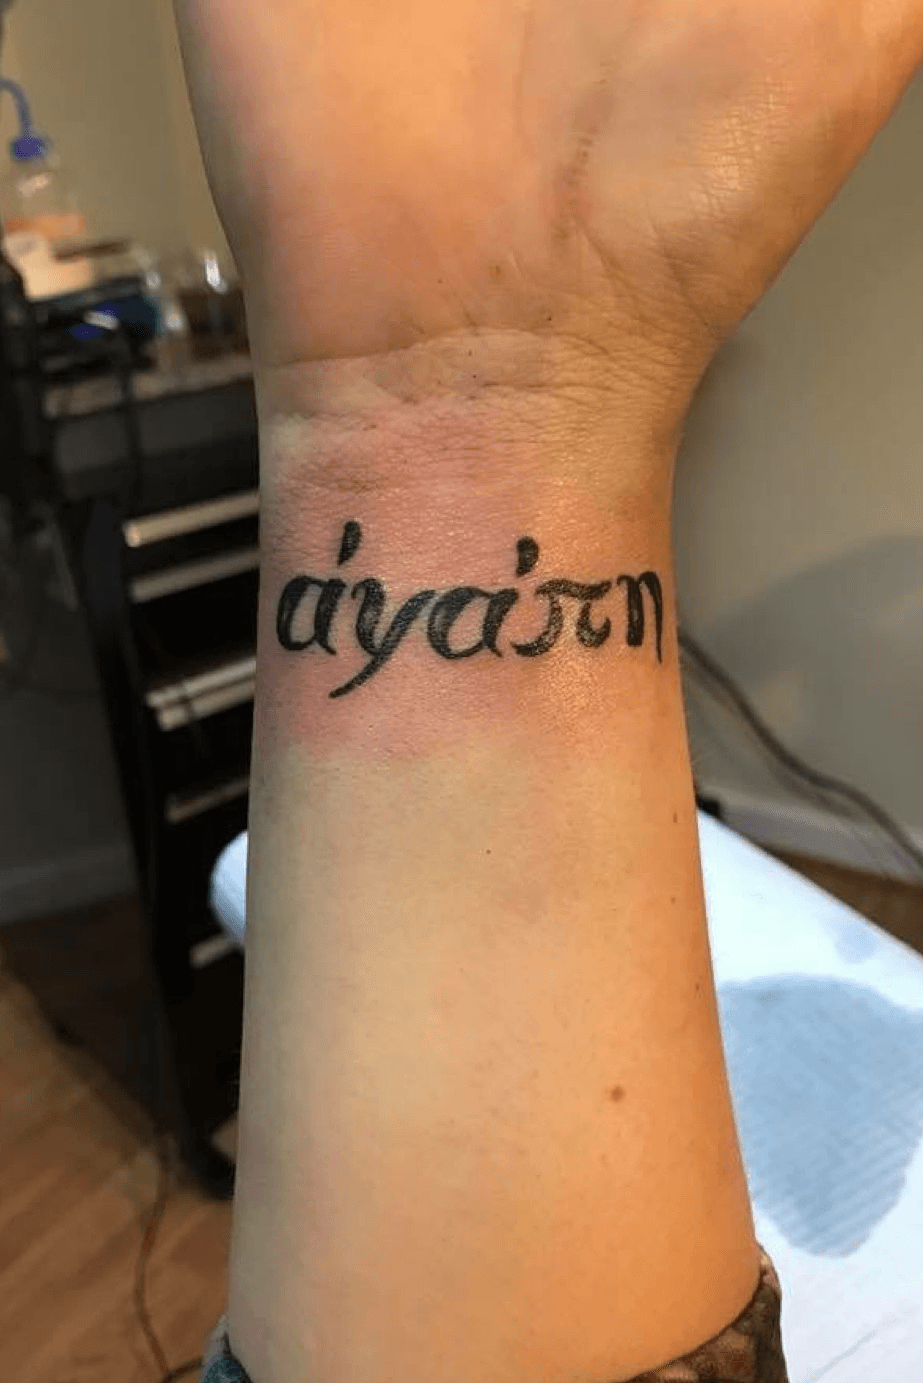 17 Tattoo Ideas That Show Love For Your Family